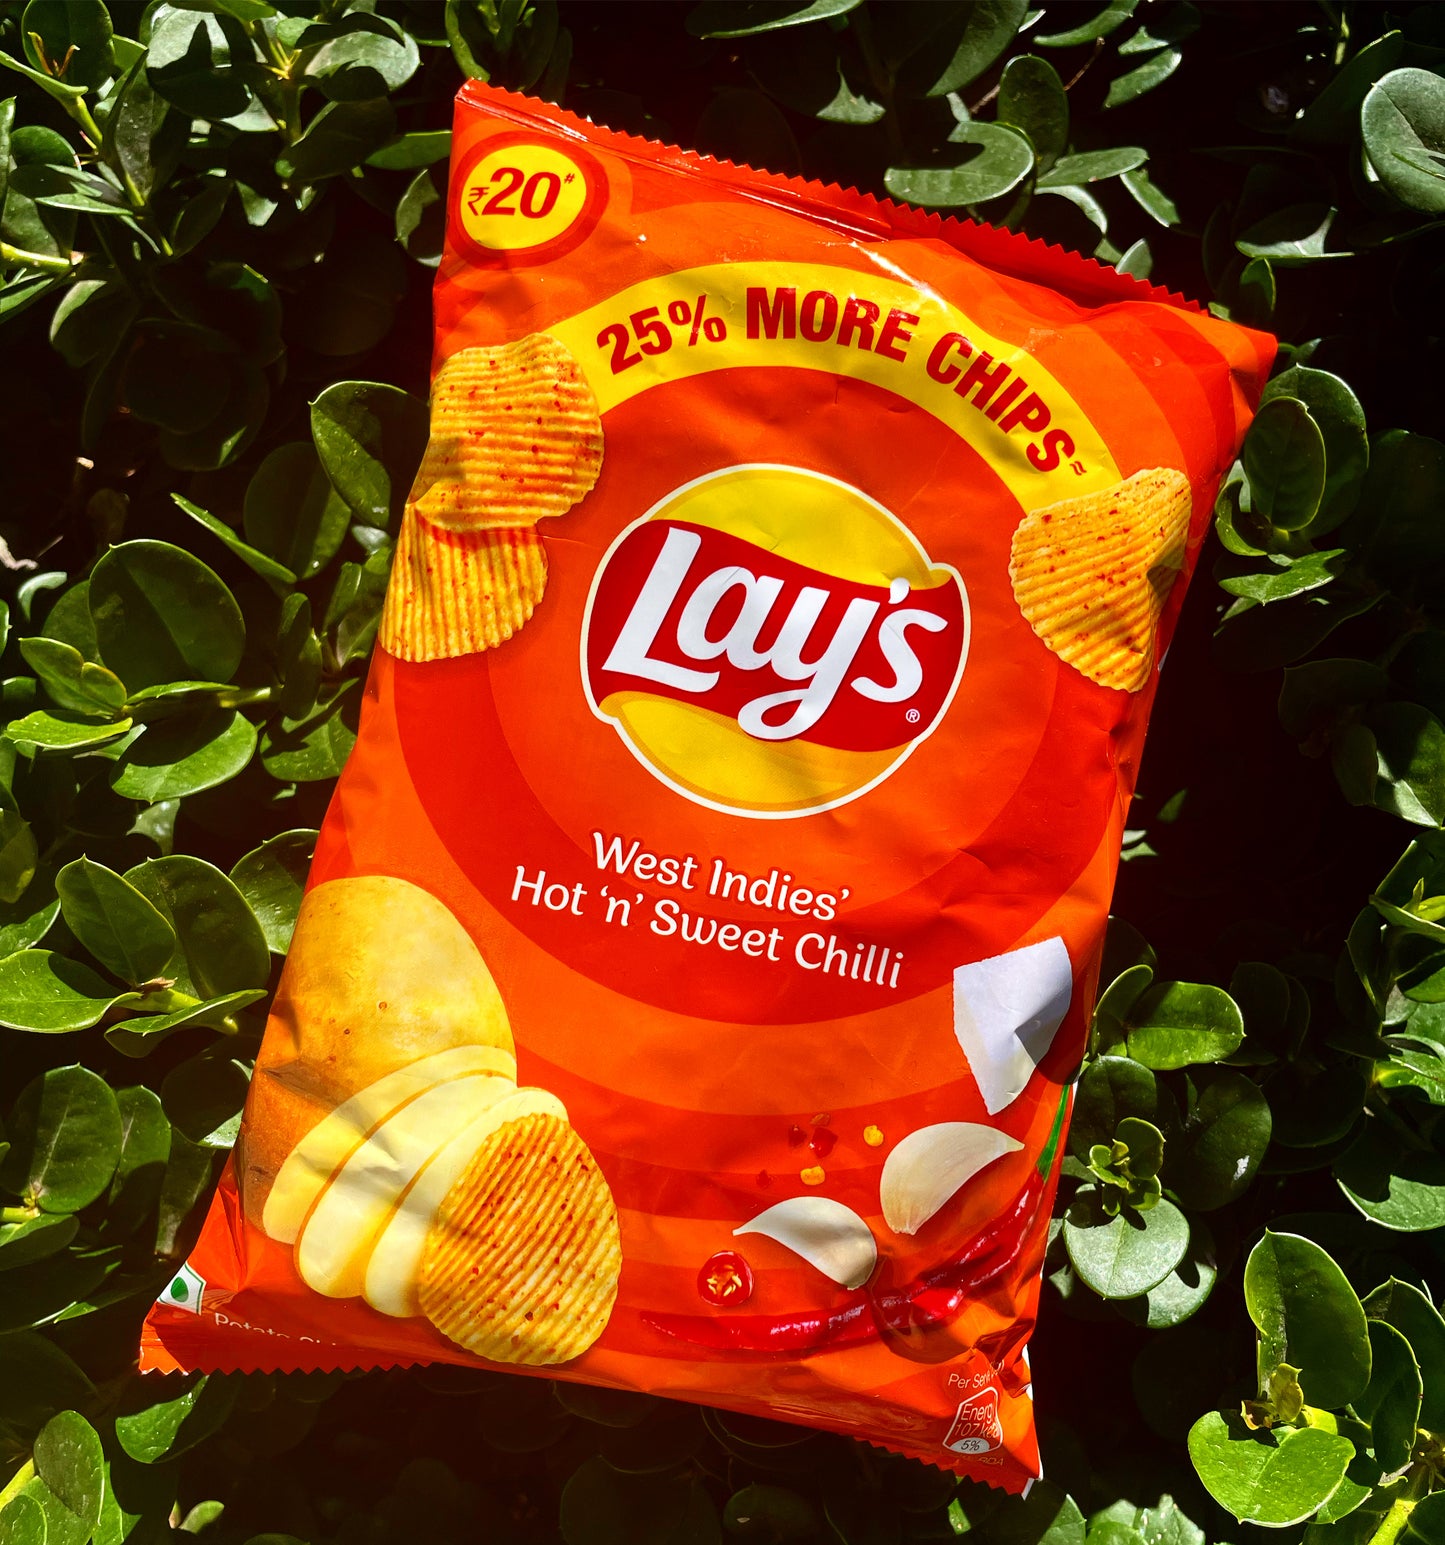 Lays West Indies Hot & Sweet Chili (India)